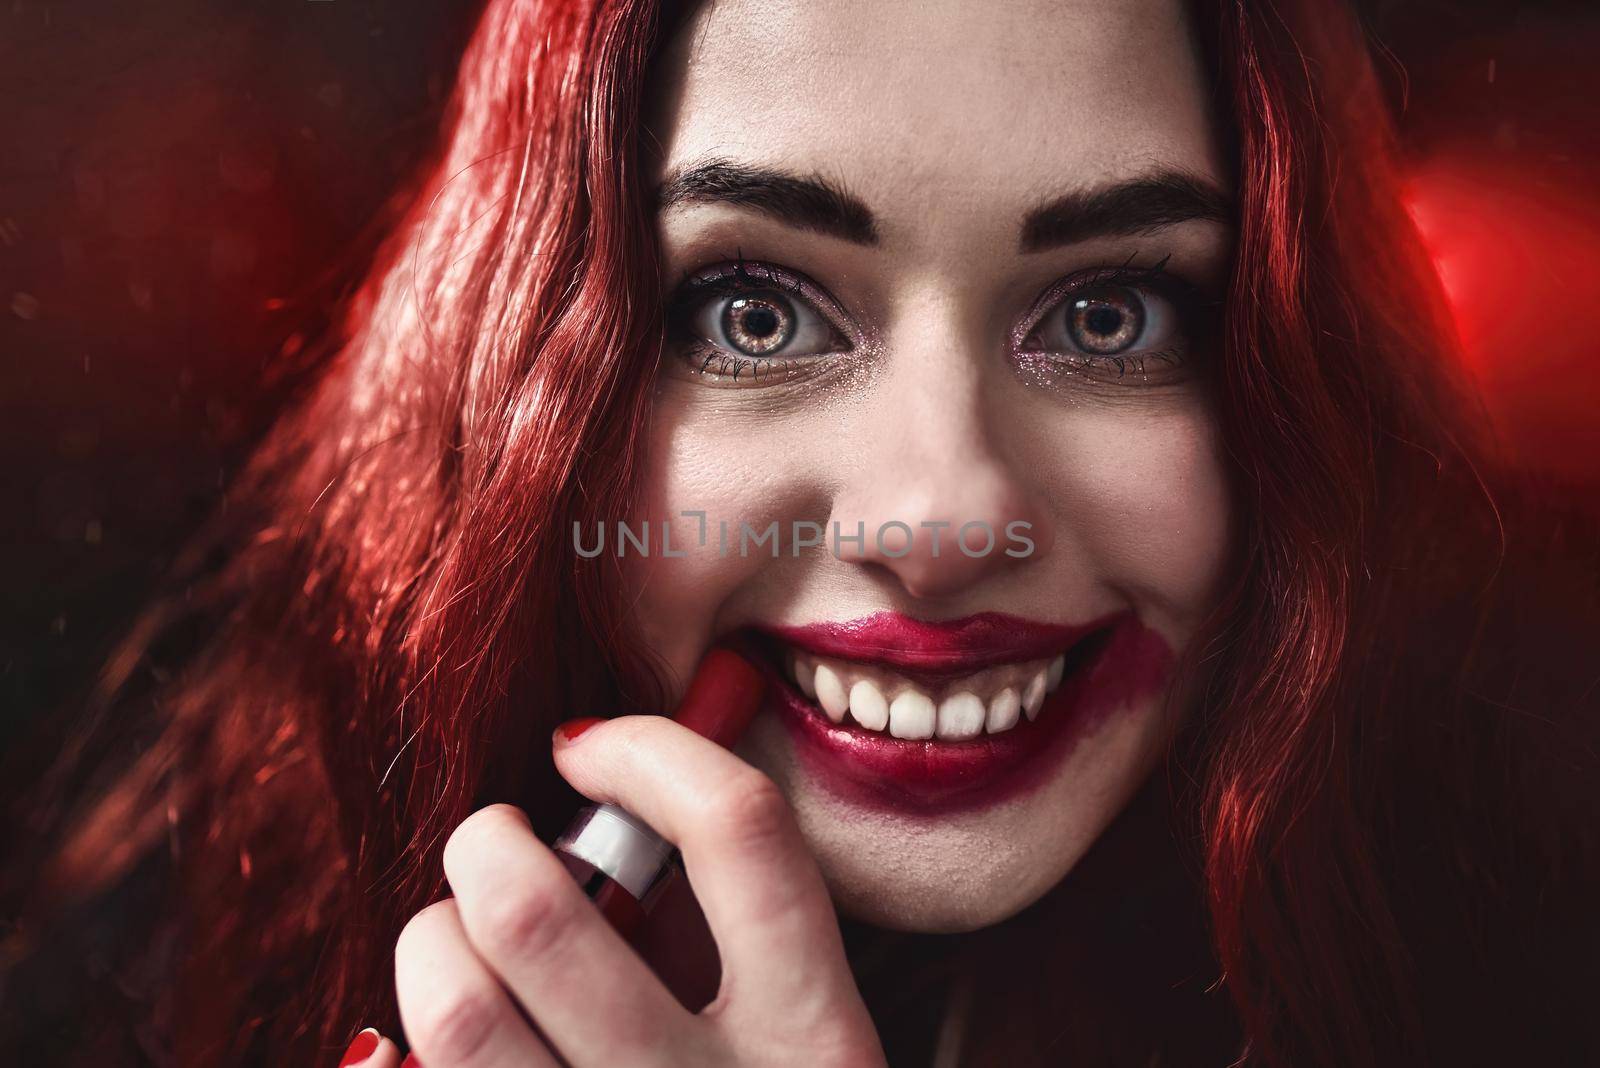 Halloween Time. Portrait of crazy-looking horror woman with red hair she is smearing red lipstick on her face, horror concept. Fear and nightmare